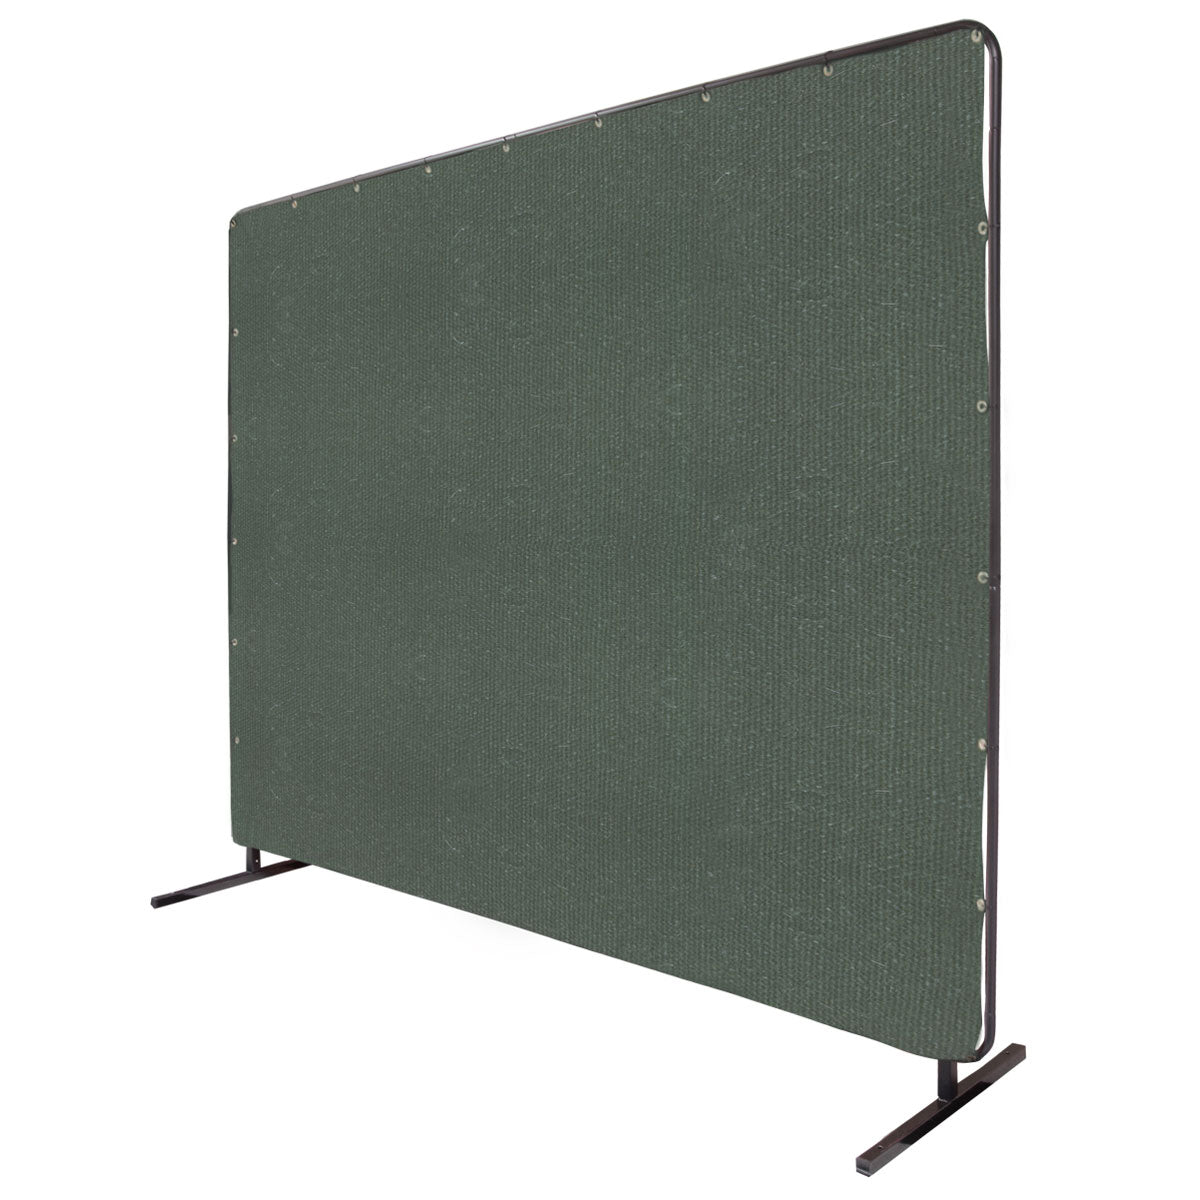 Welding Screen 6X8 Round Tube Quick Frame Standard Single Panel (6x8CF1) Olive Drab (Canvas)